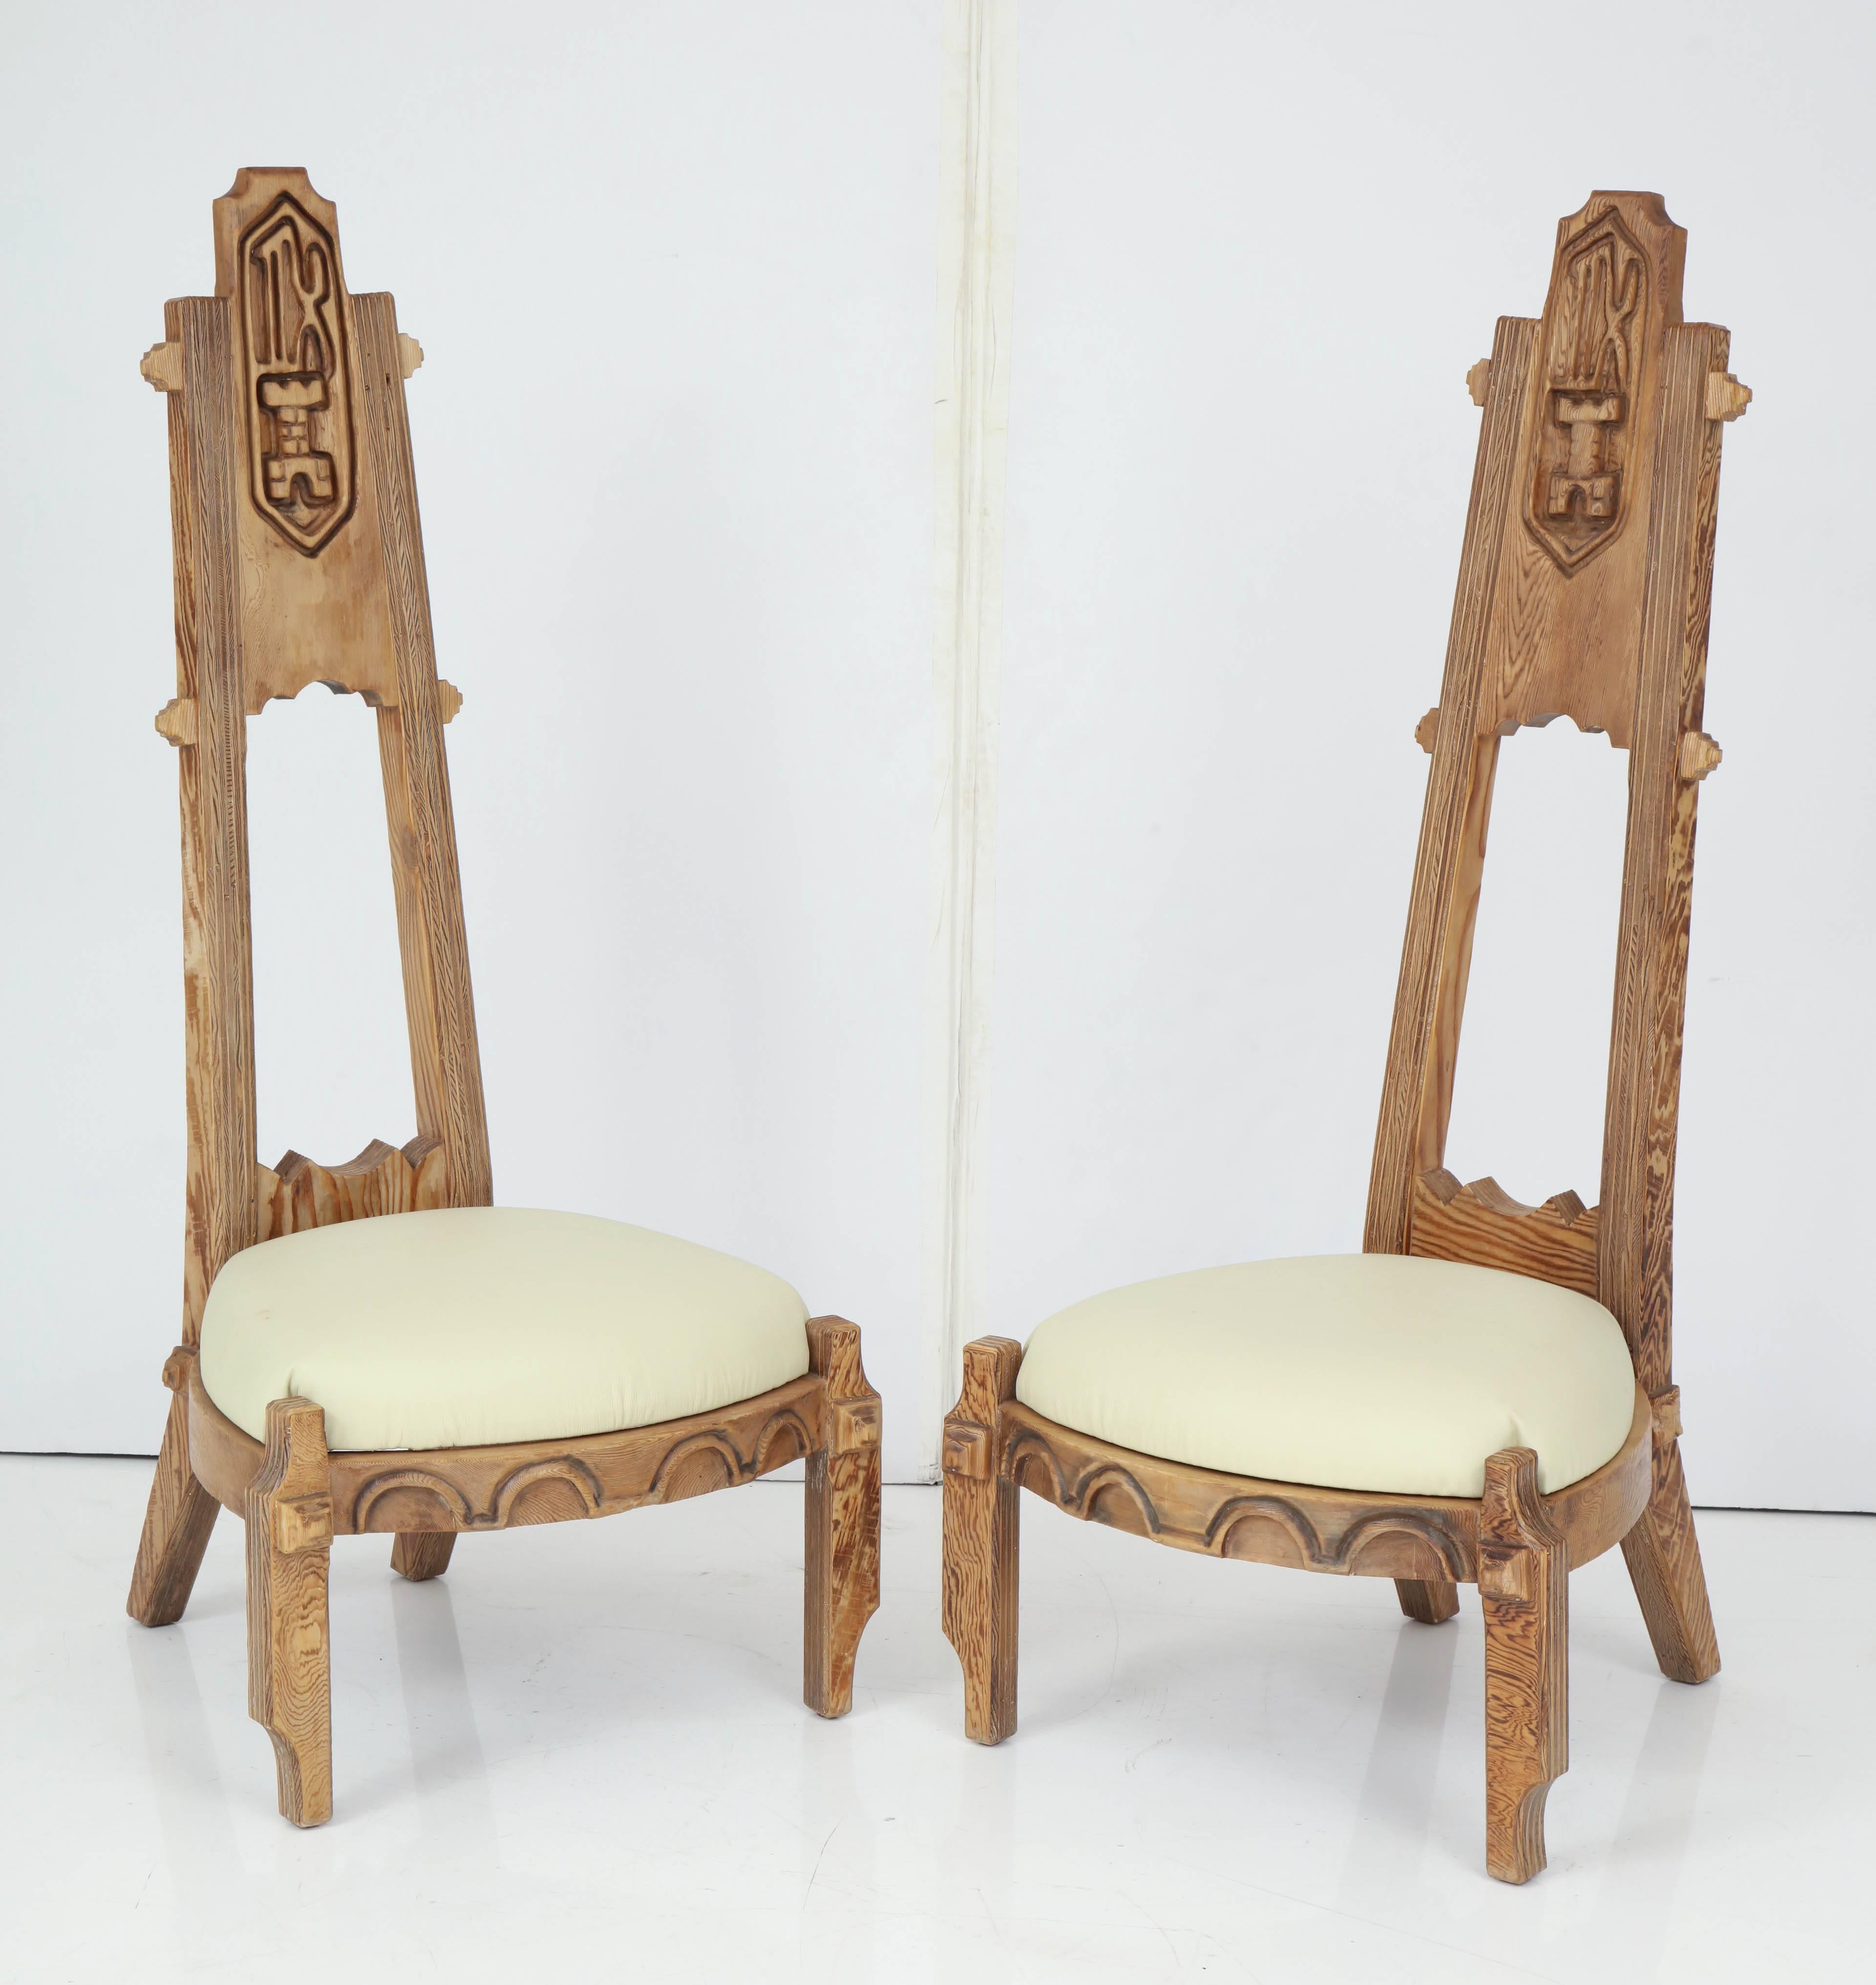 Pair of chairs with very tall backs having deep carved designs of Bishops from chess game with white leather seats.